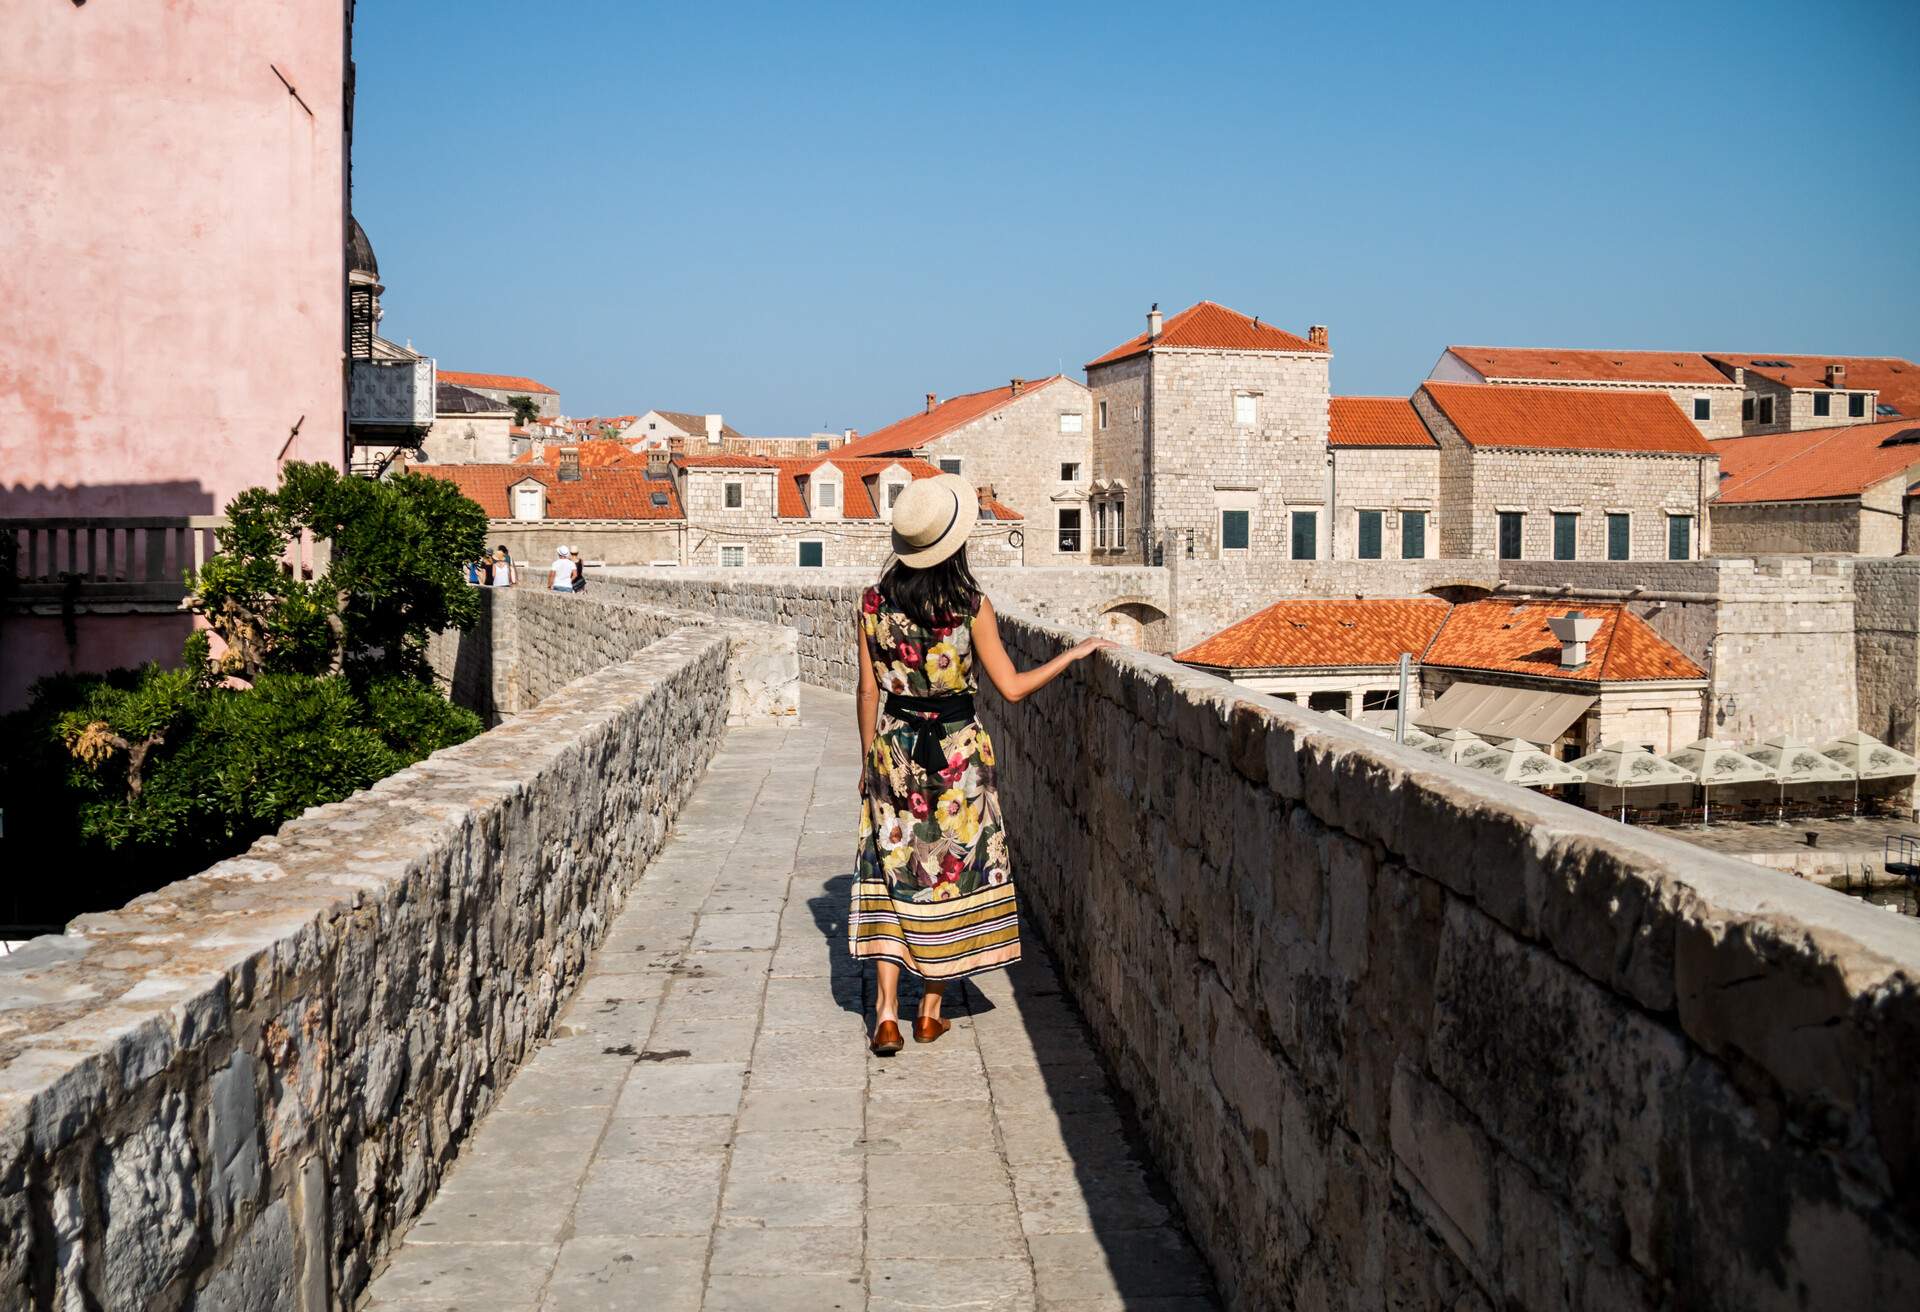 DEST_CROATIA_DUBROVNIK_Woman in Hat Walking Along a Section of the Walls of Dubrovnik_GettyImages-842442538